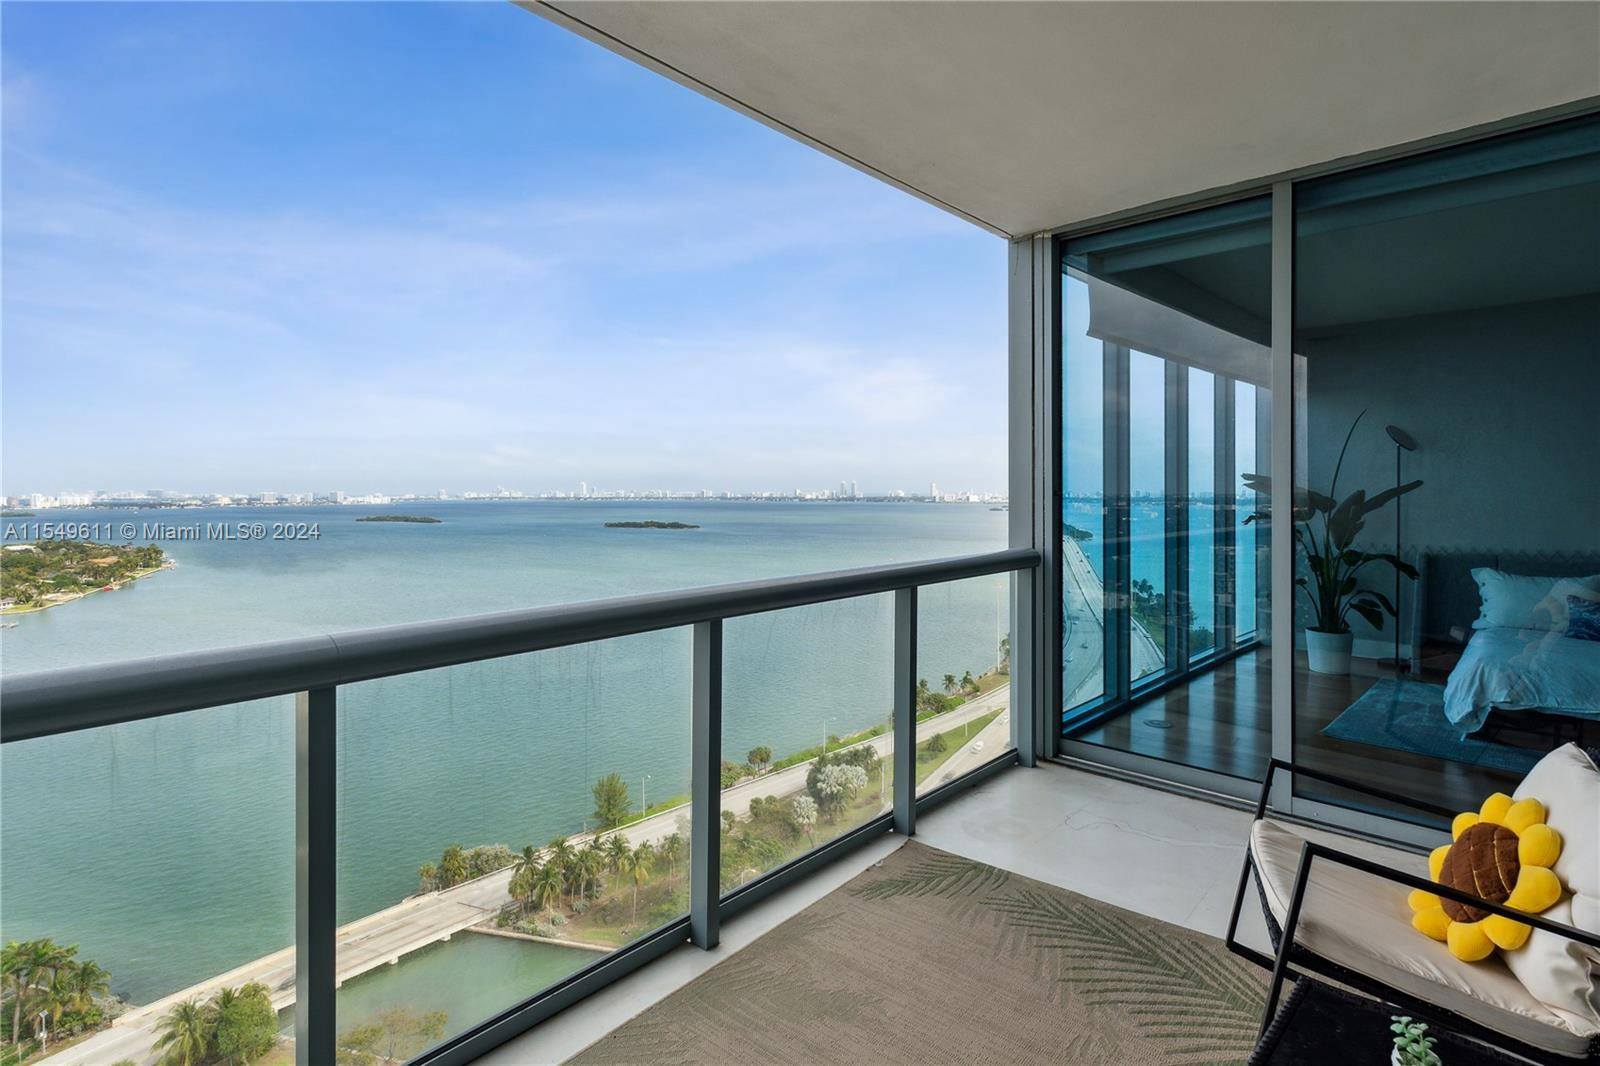 Discover luxury living in this stunning 2 bedroom, 2.